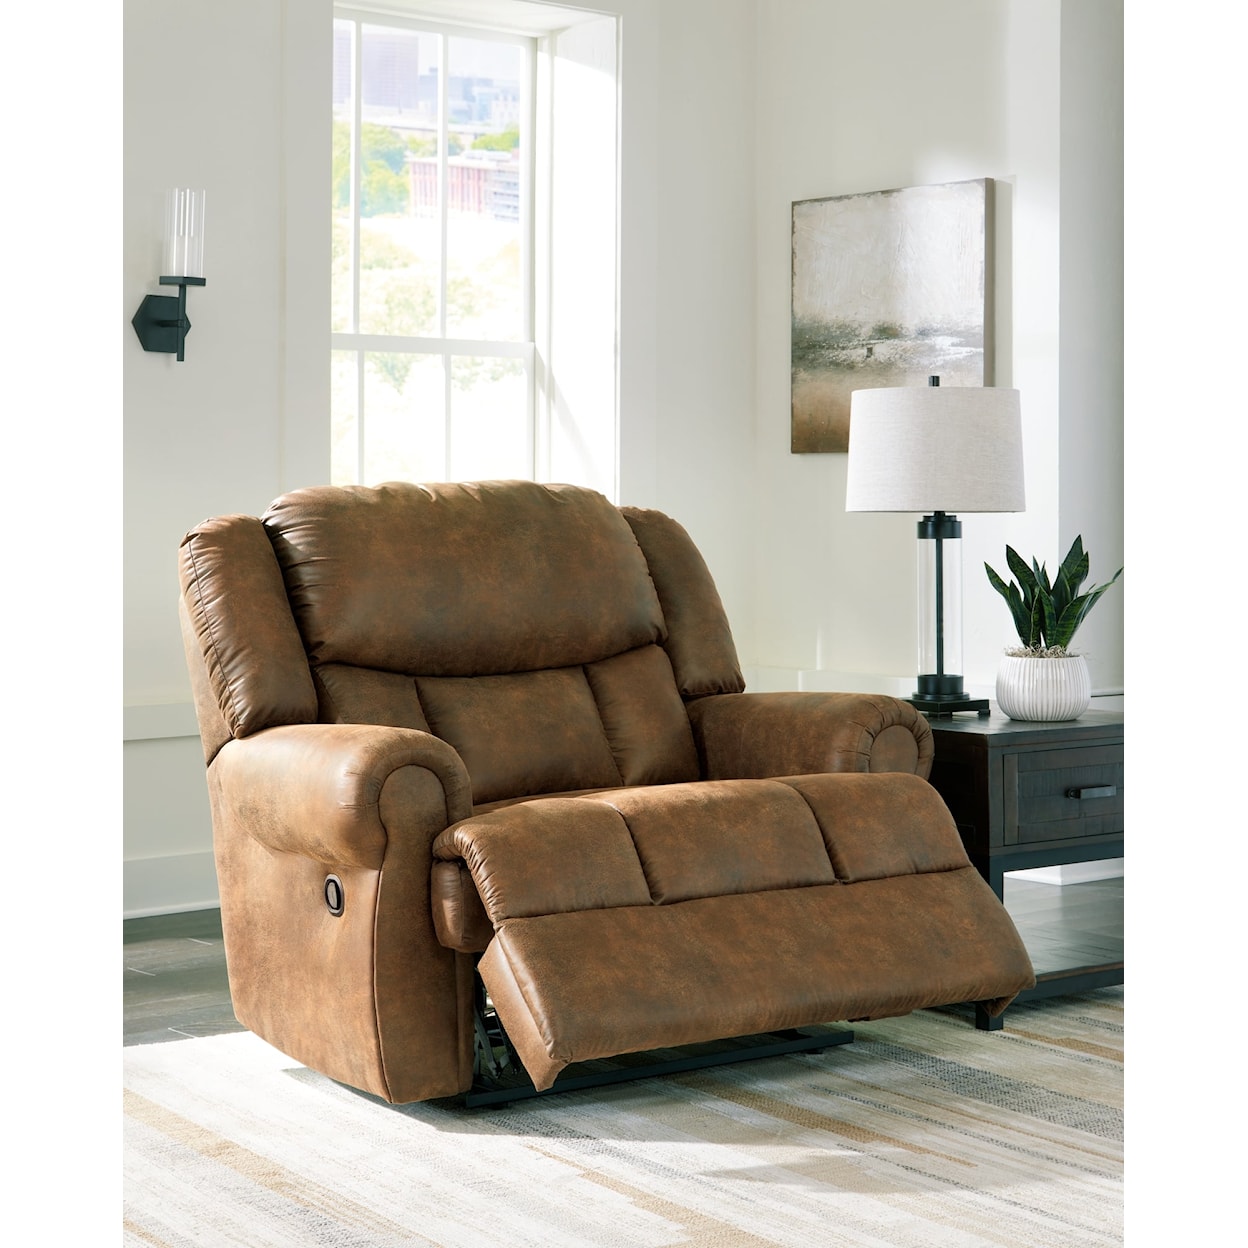 Signature Design by Ashley Boothbay Wide Seat Recliner